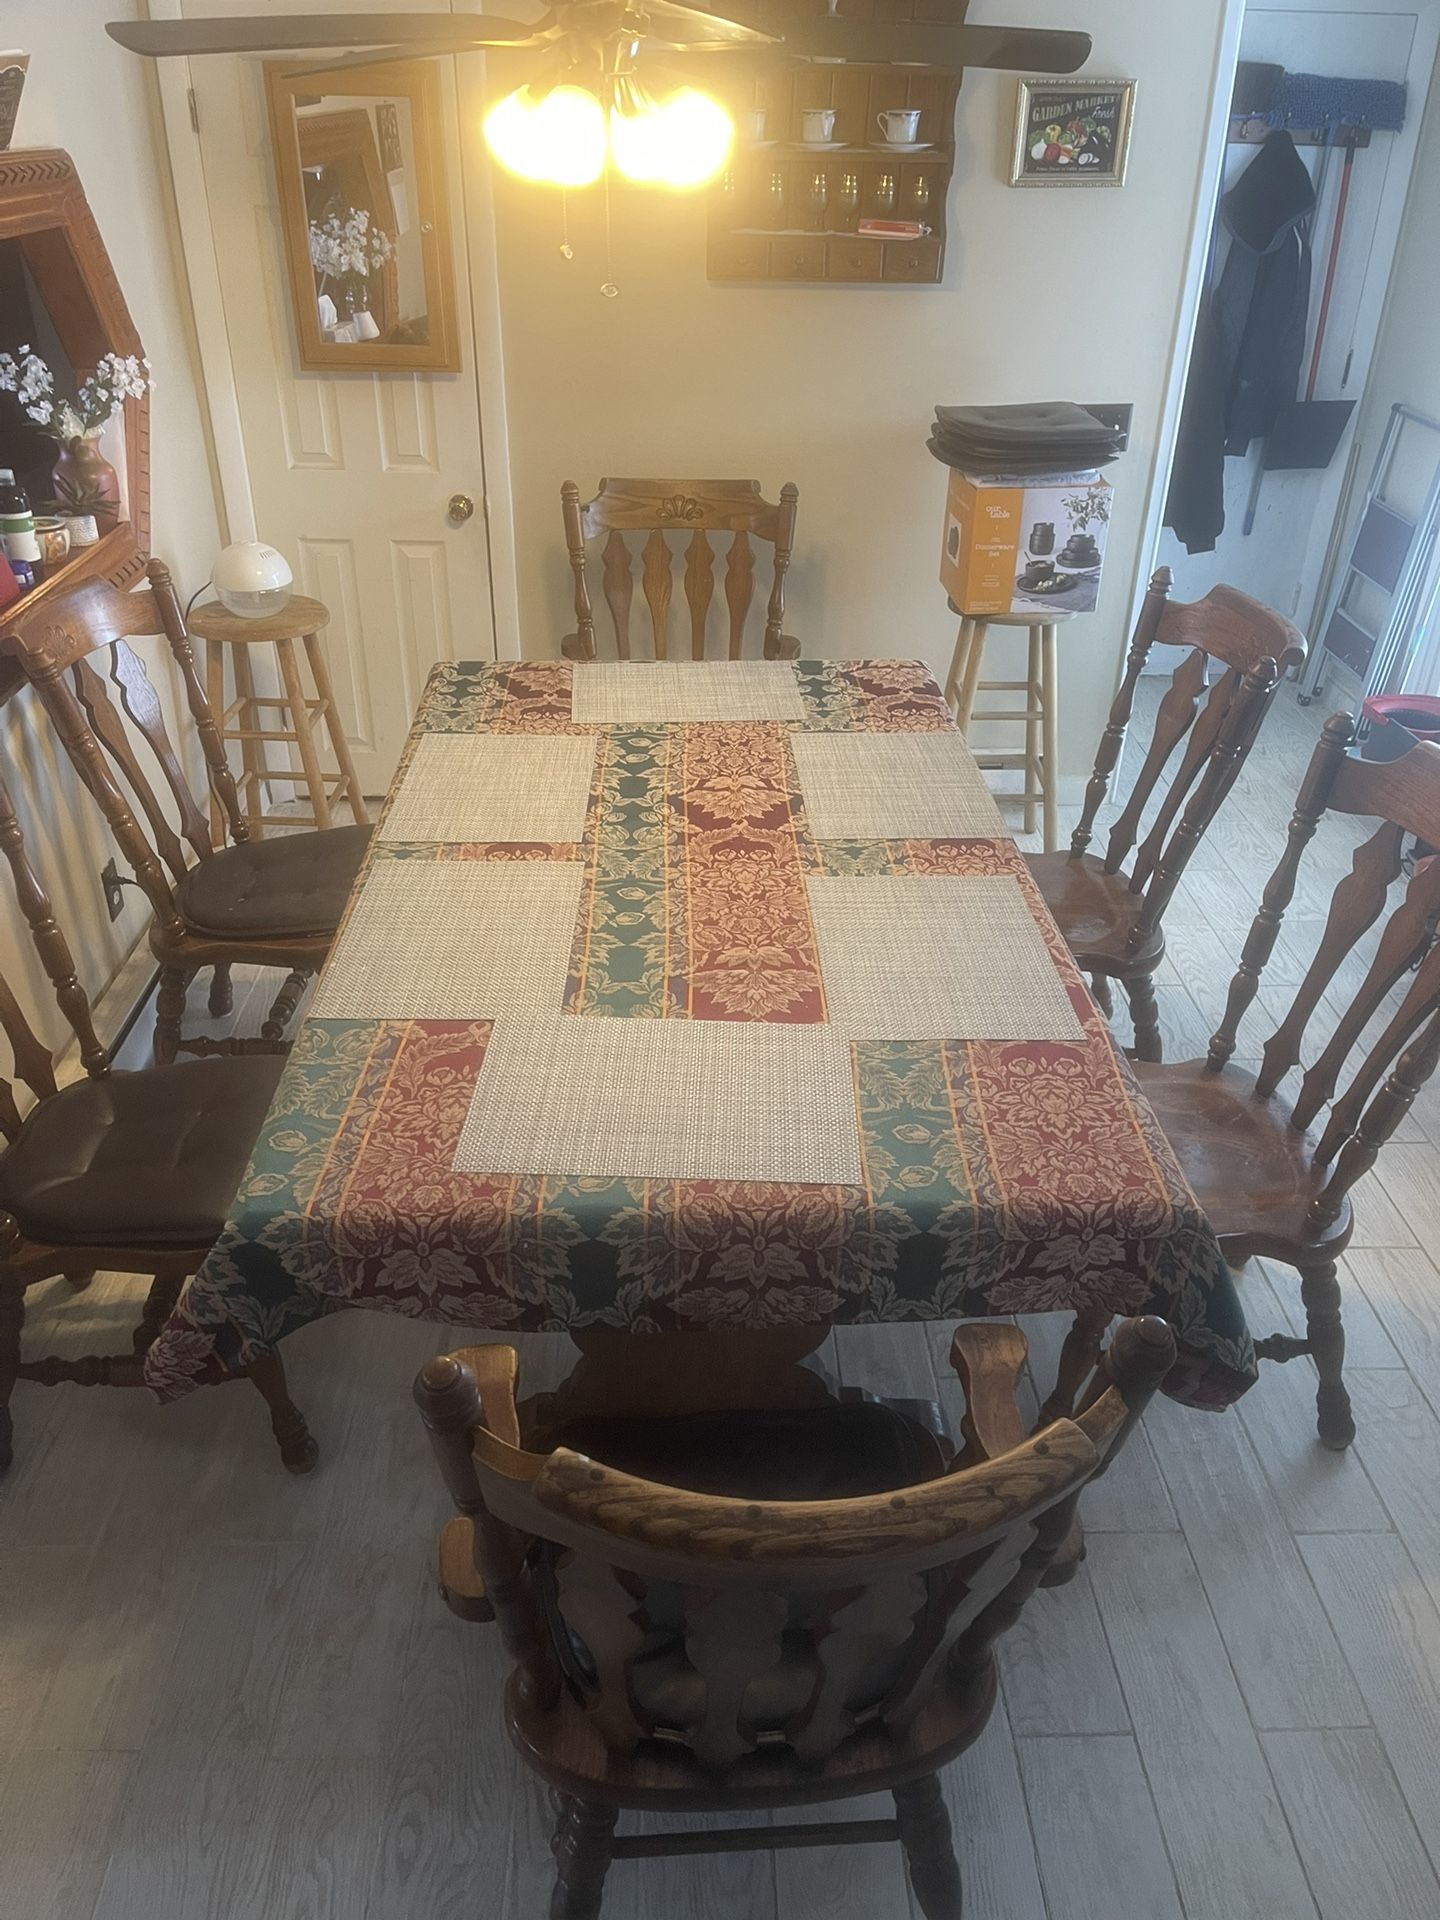 Antique Sturdy, Built, Brown Real Wood Kitchen Table 